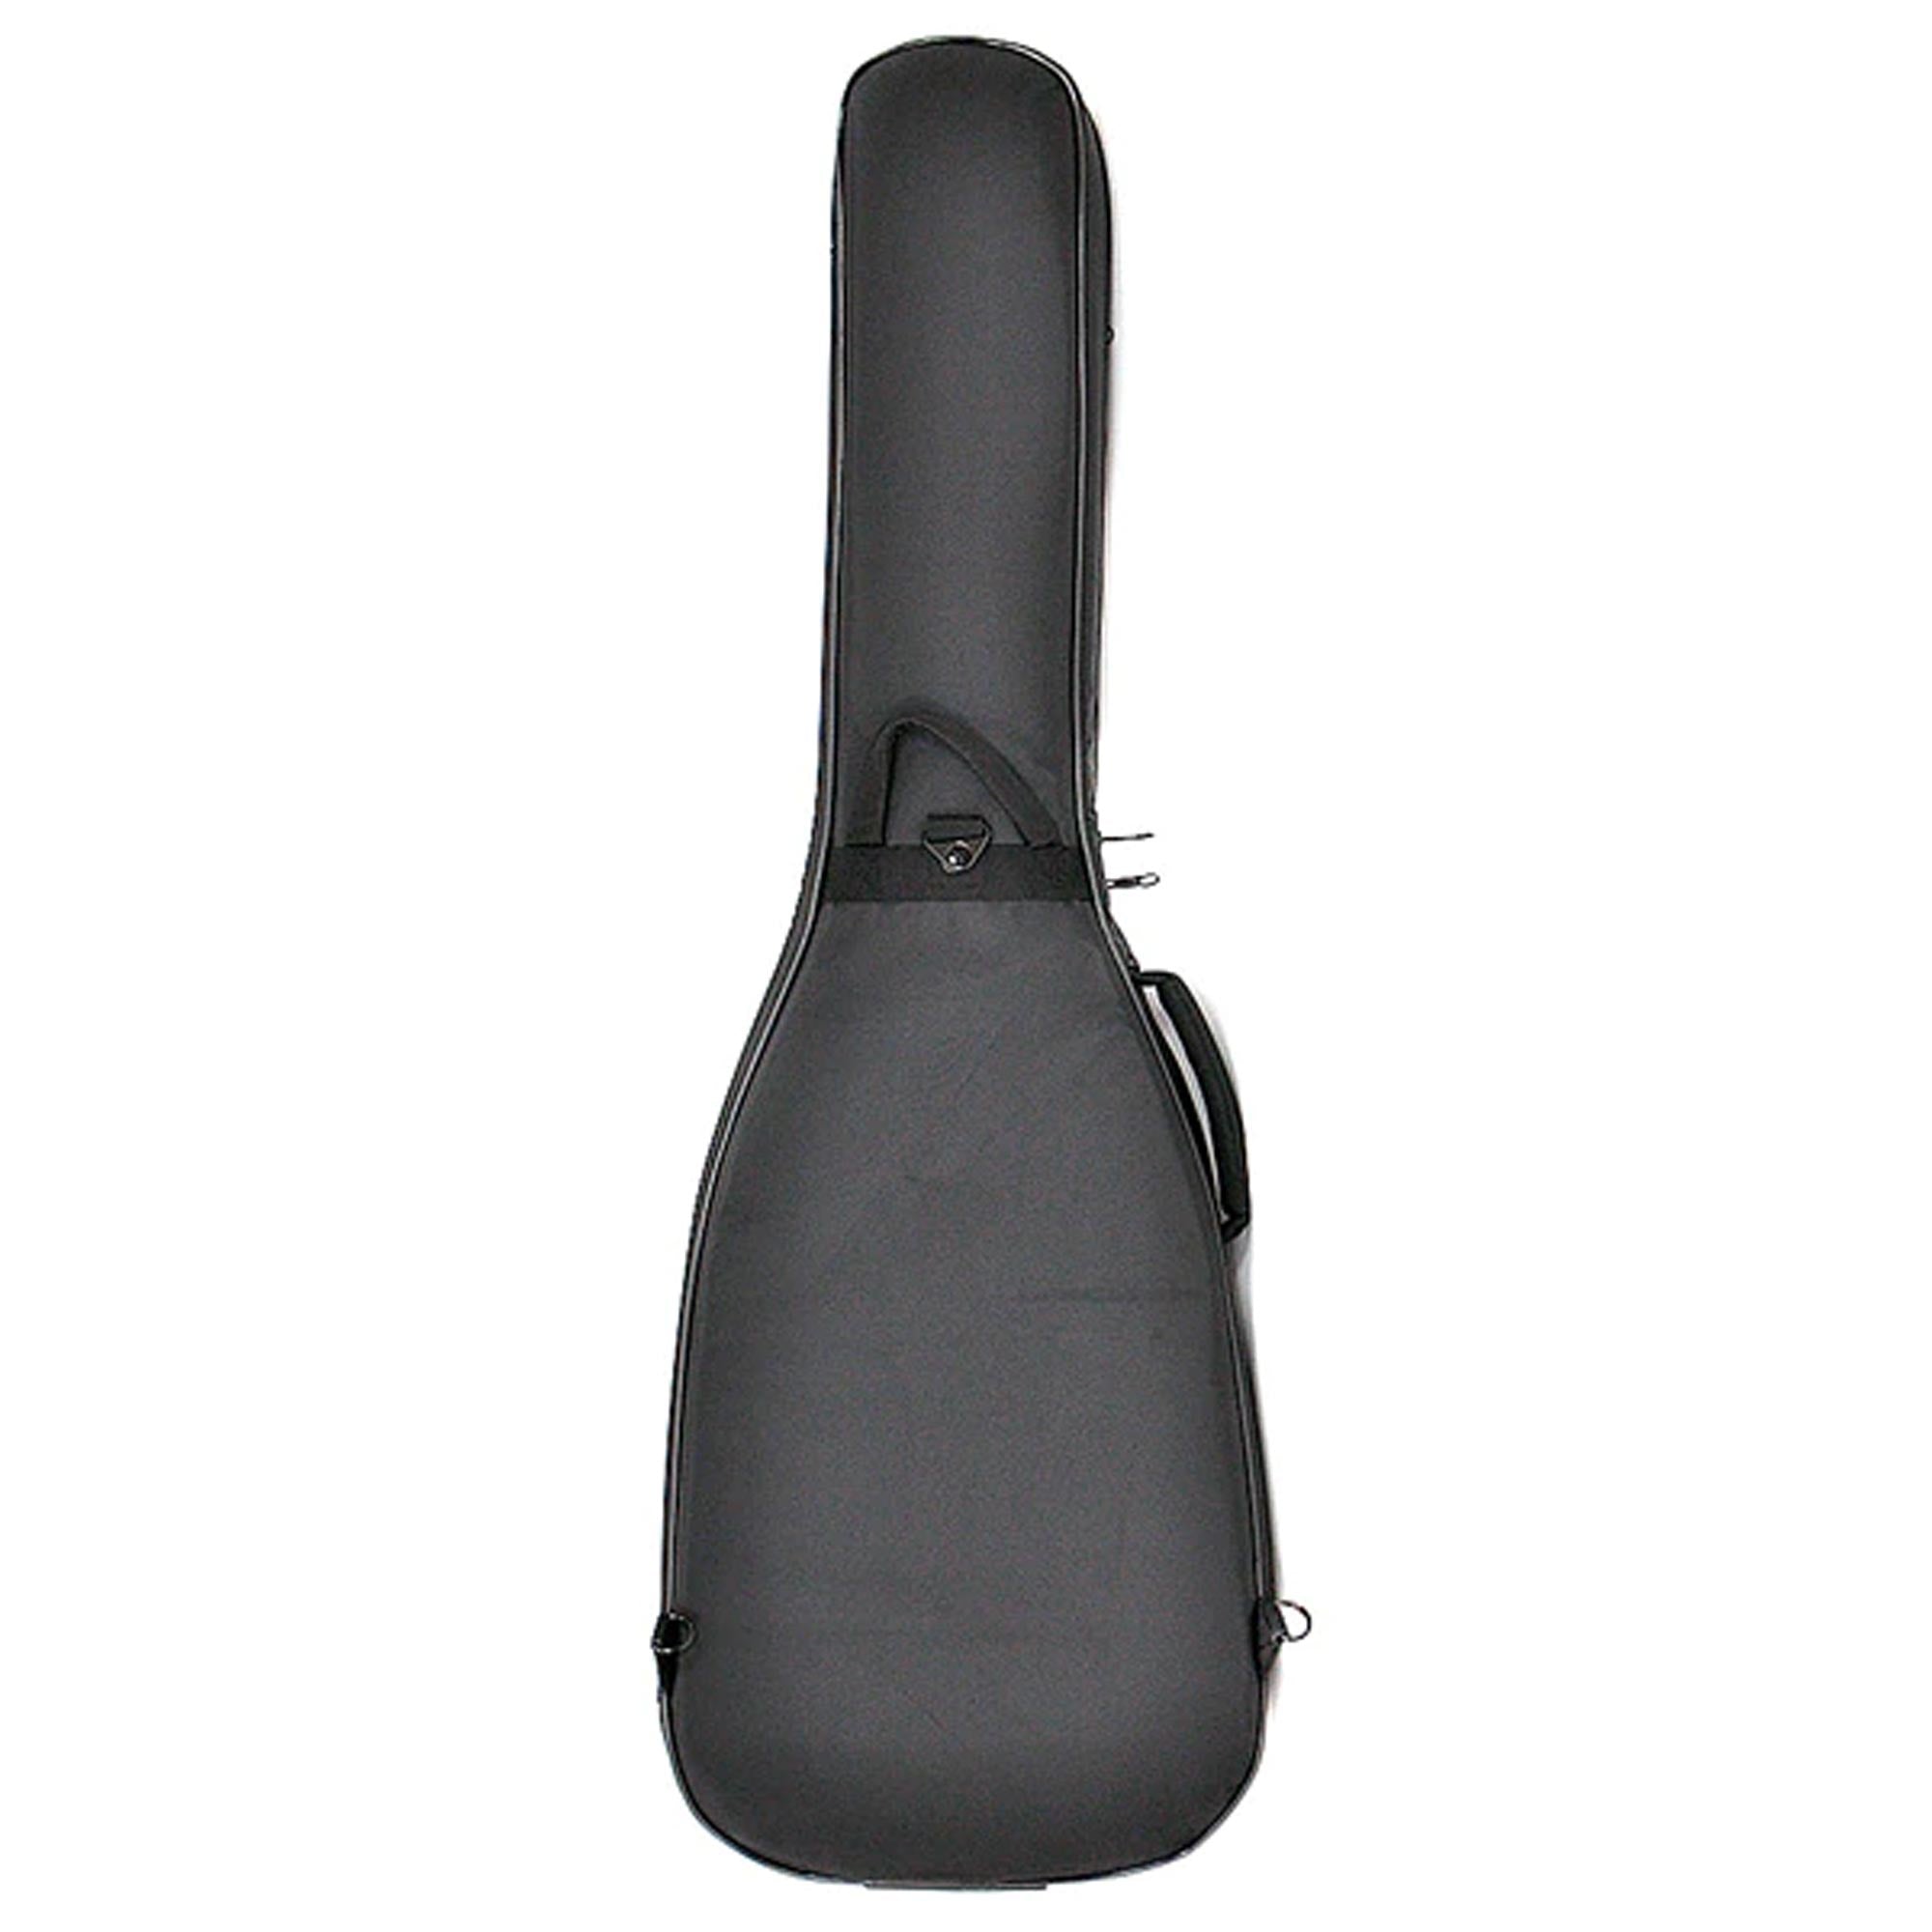 Suhr Deluxe Padded Electric Bass Guitar Gig Bag Case Black | The 